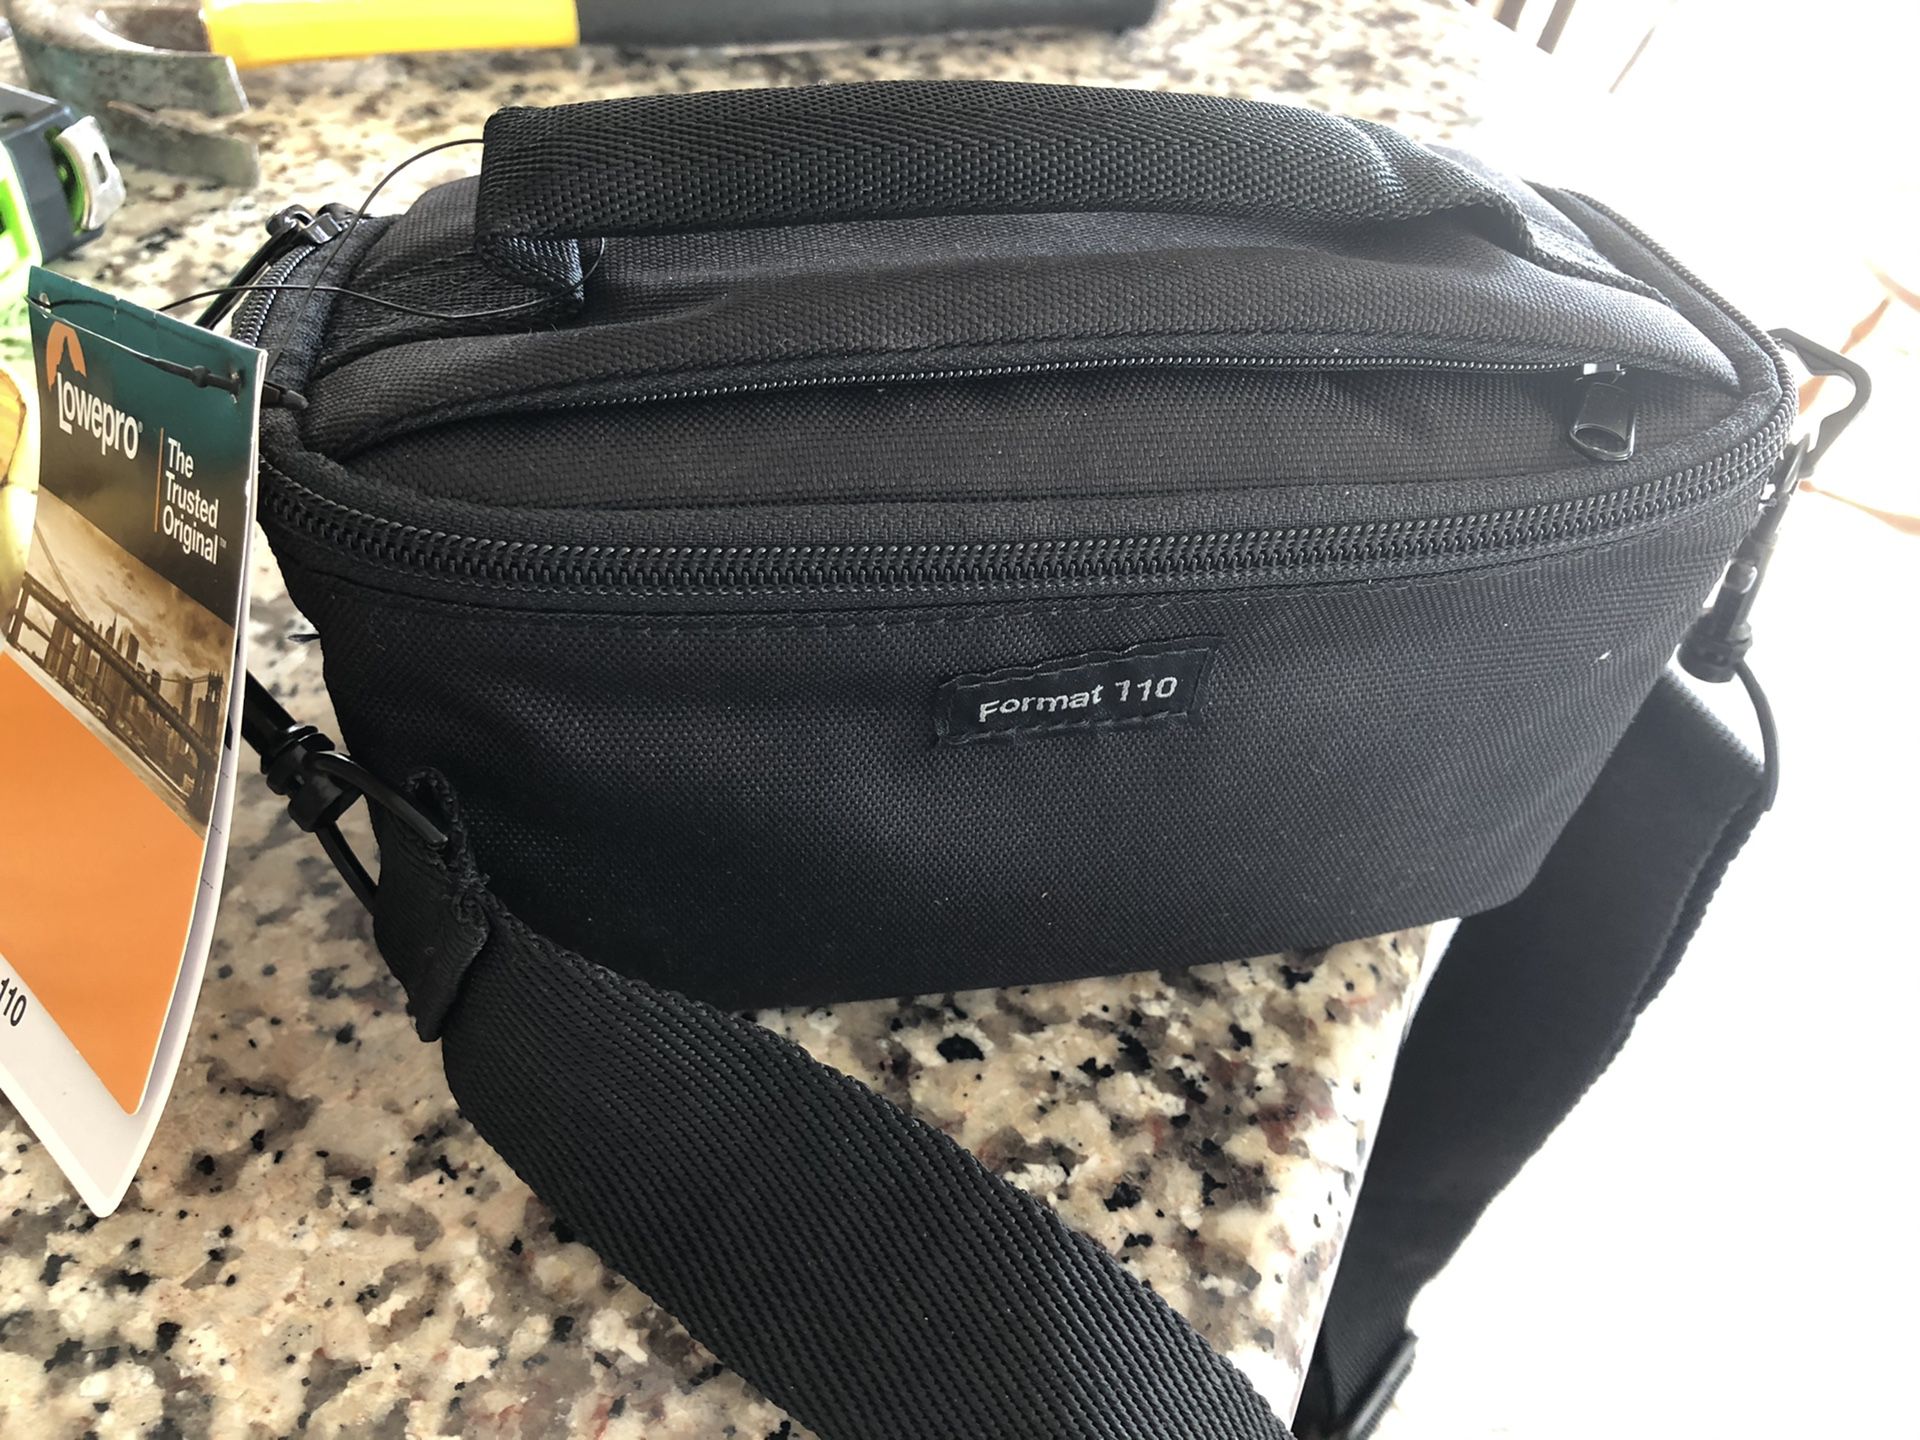 New camera bag with tags